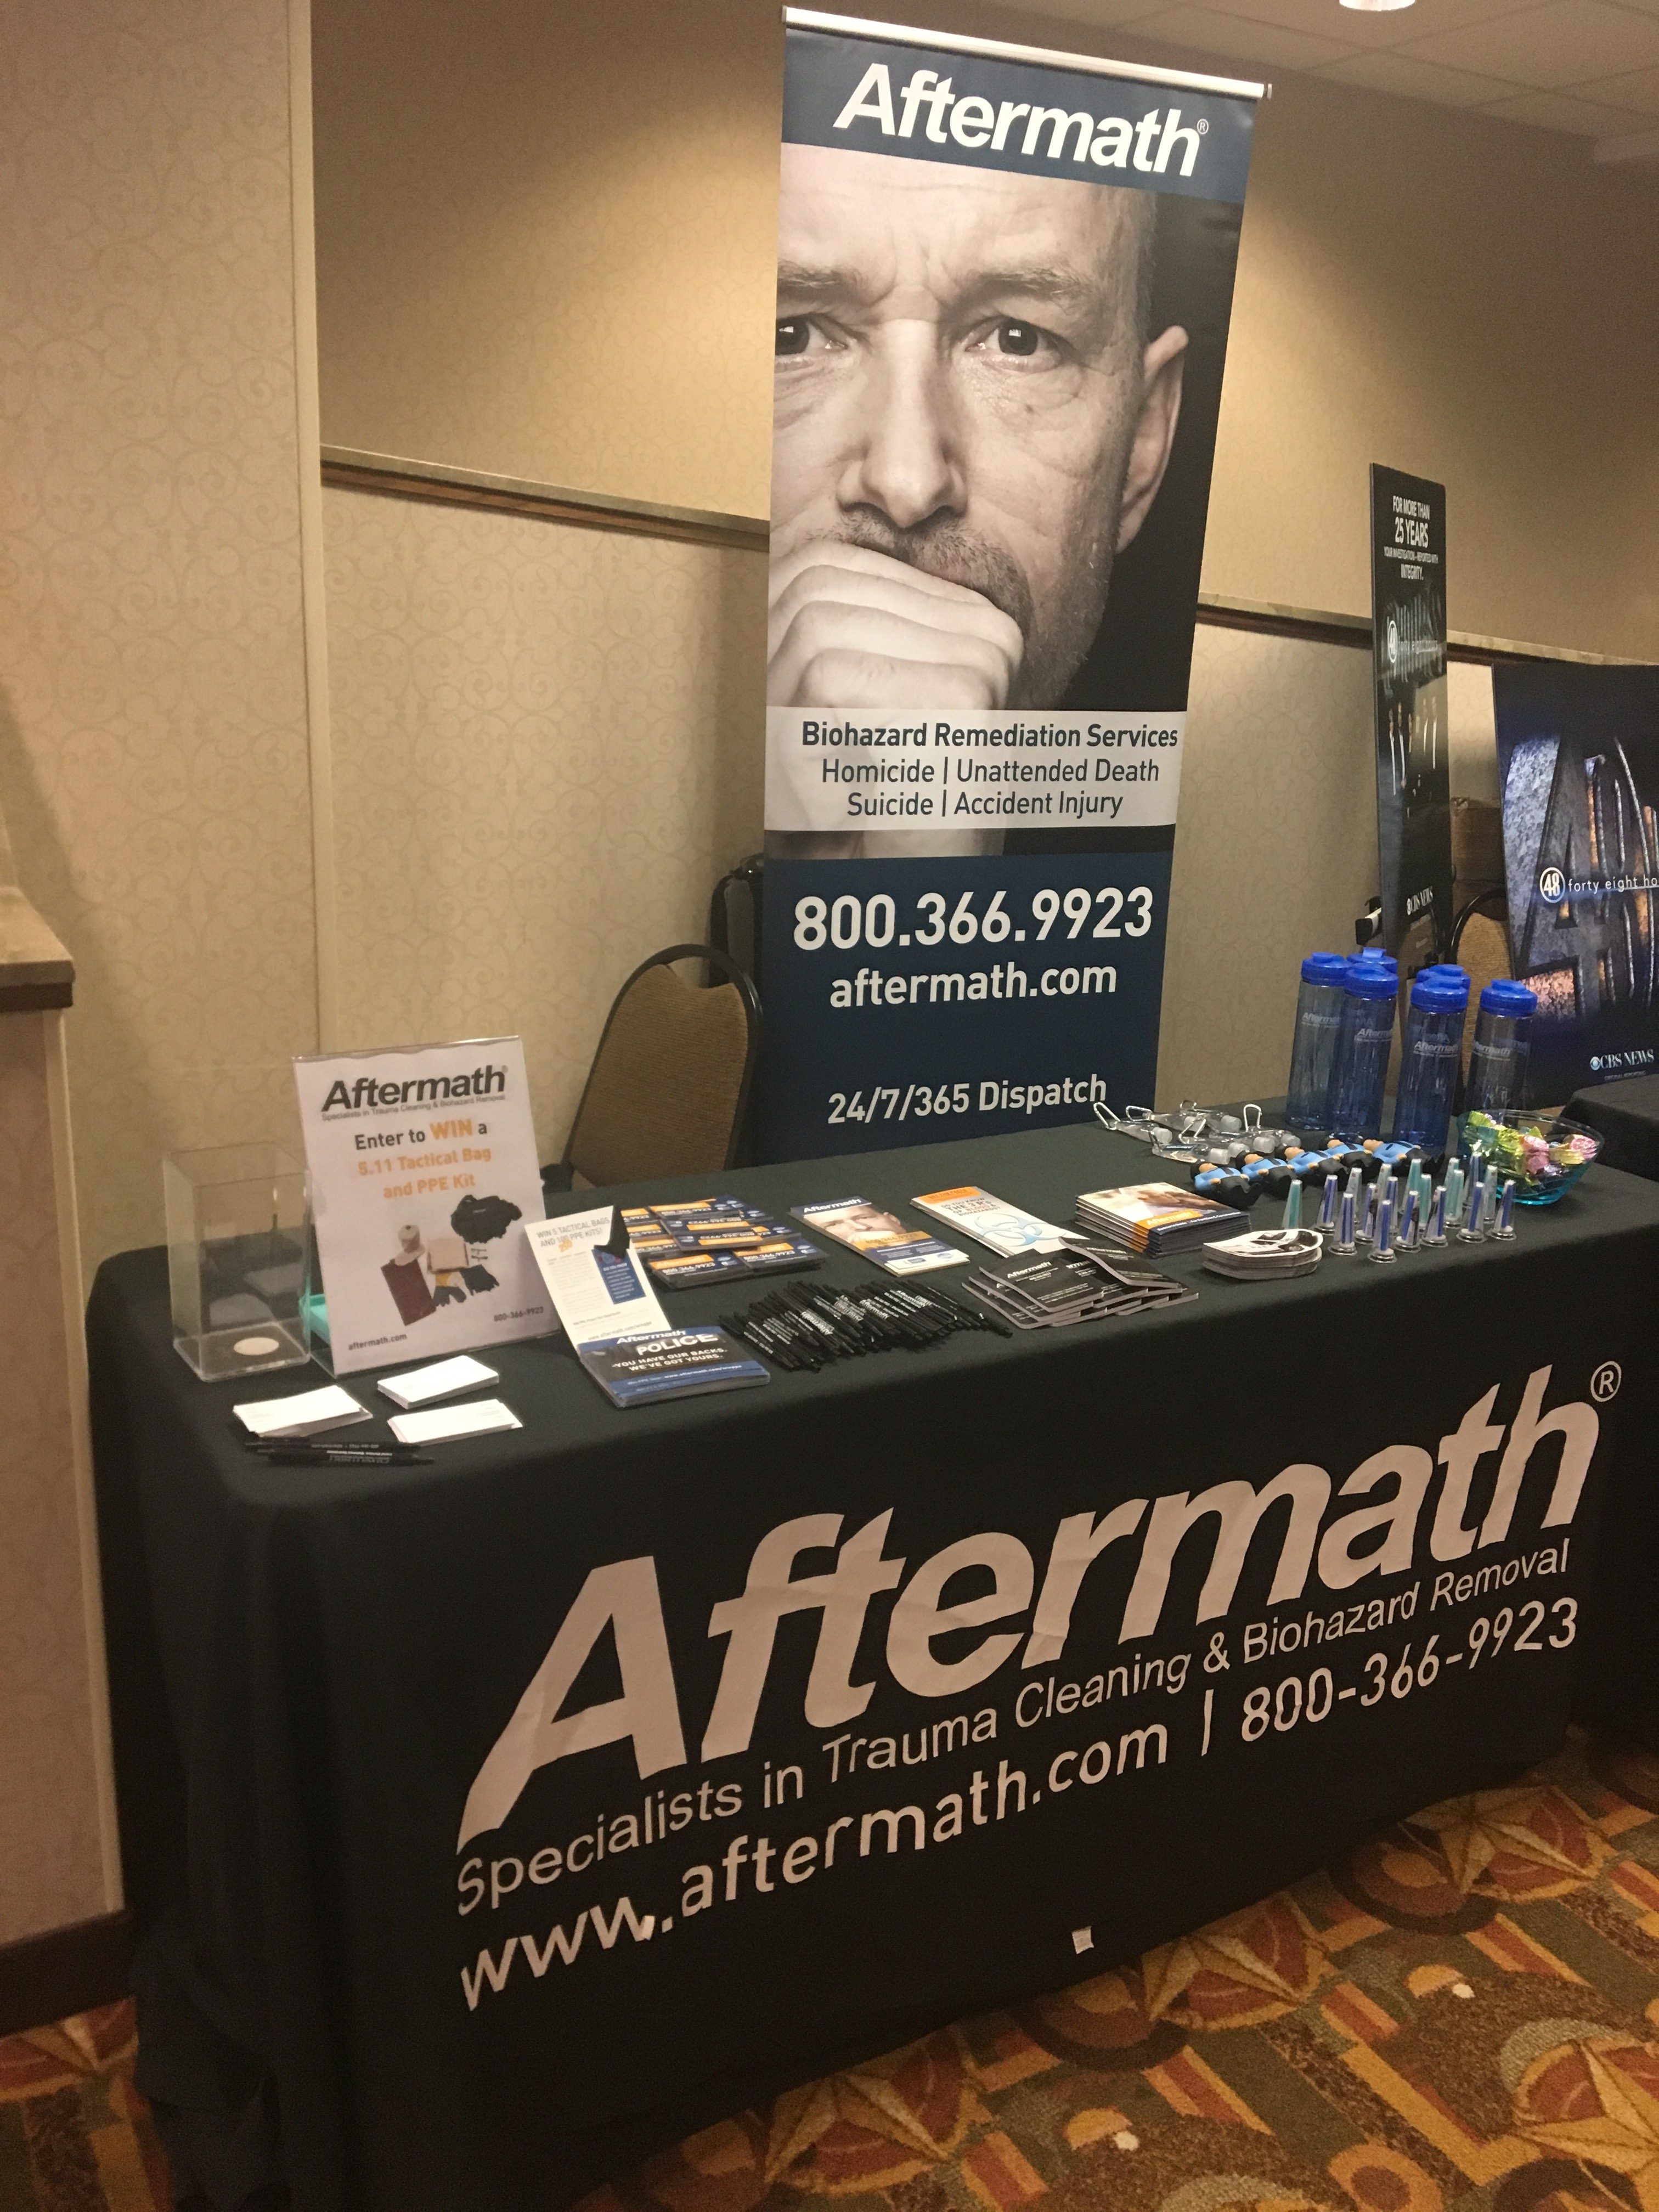 Aftermath booth at Homicide Inv. of Texas Conference.